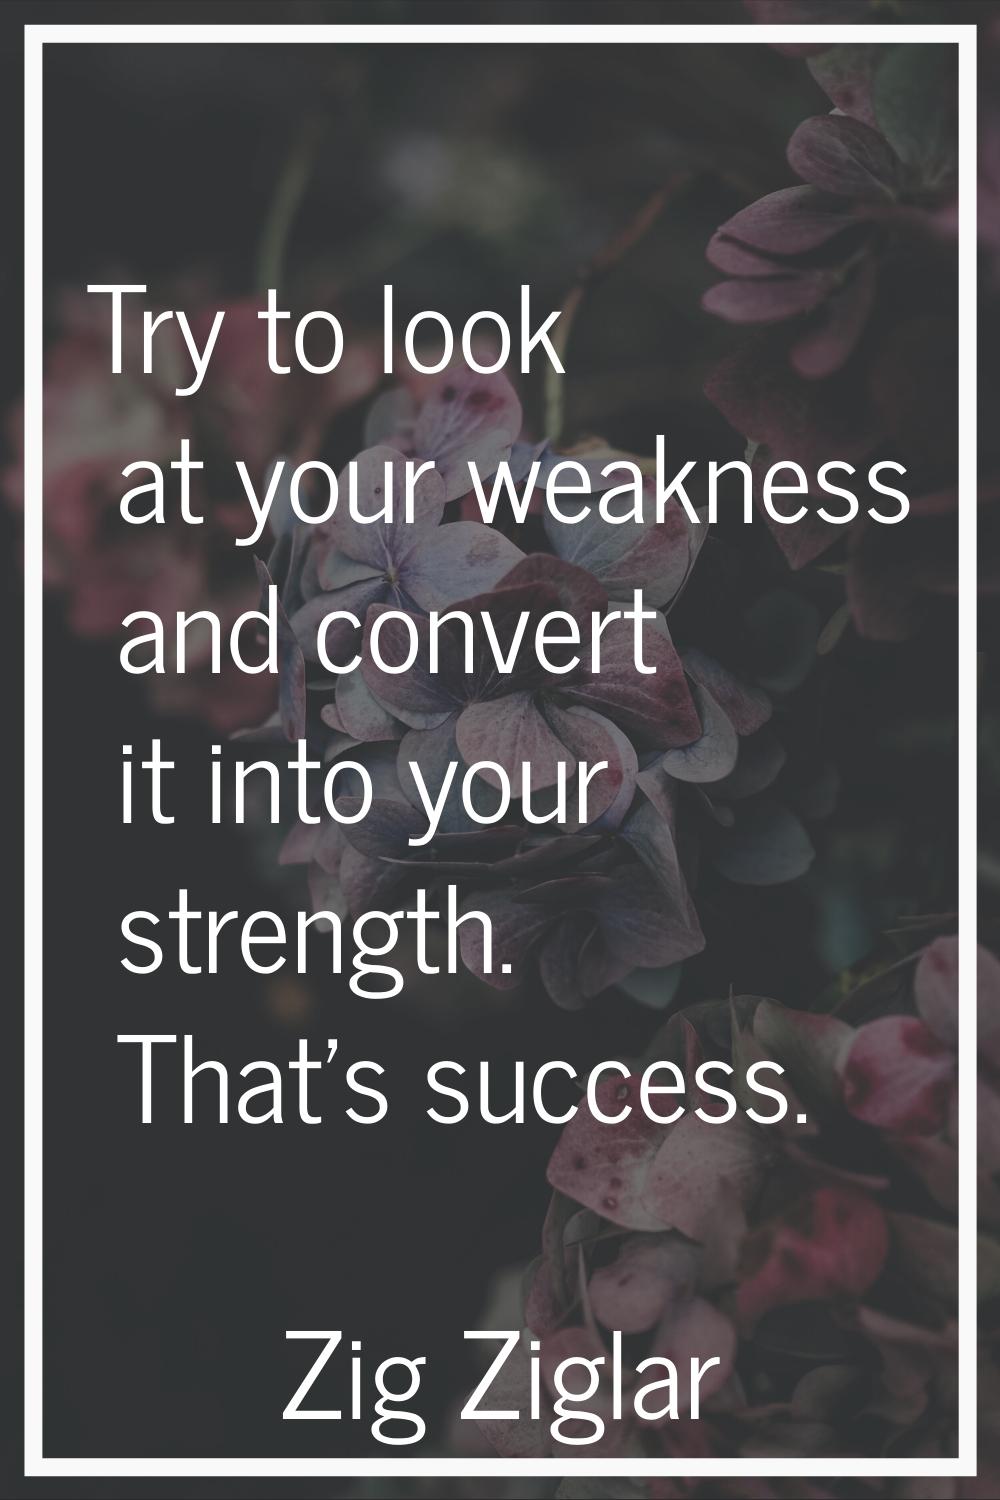 Try to look at your weakness and convert it into your strength. That's success.